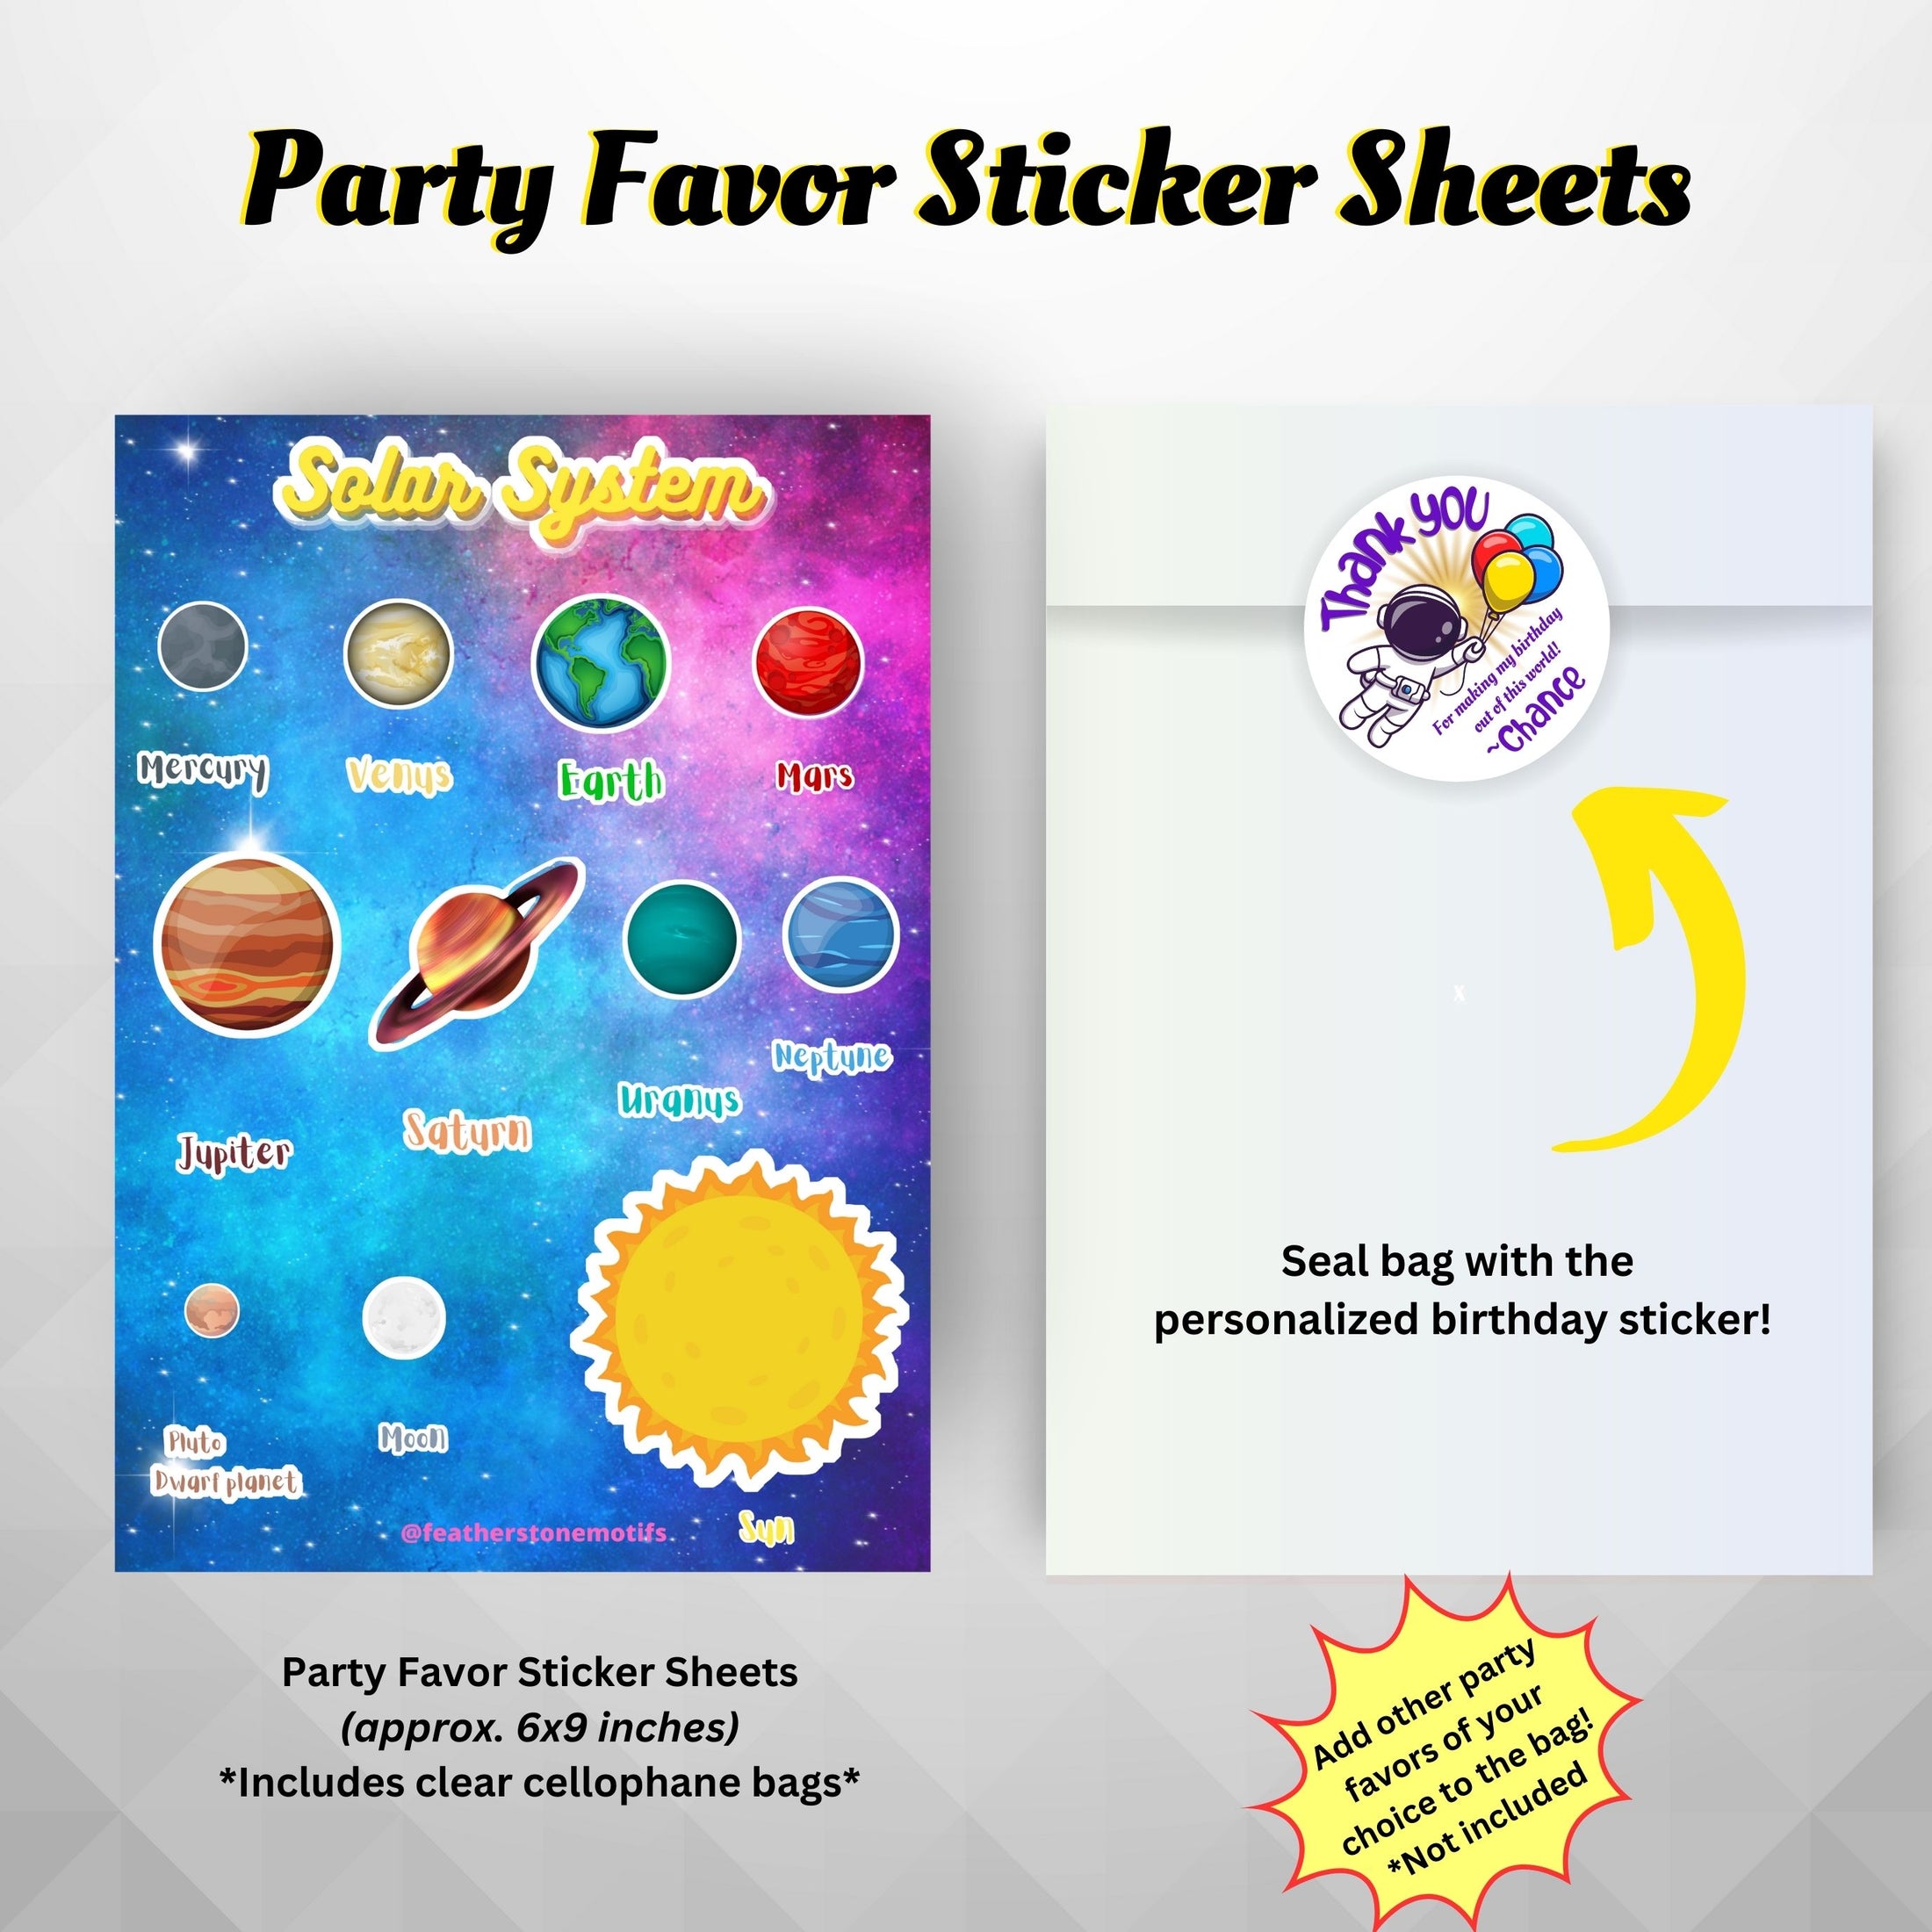 This image shows the solar system sticker sheet included as a party favor, the cellophane bag, and the personalized paper thank you sticker.